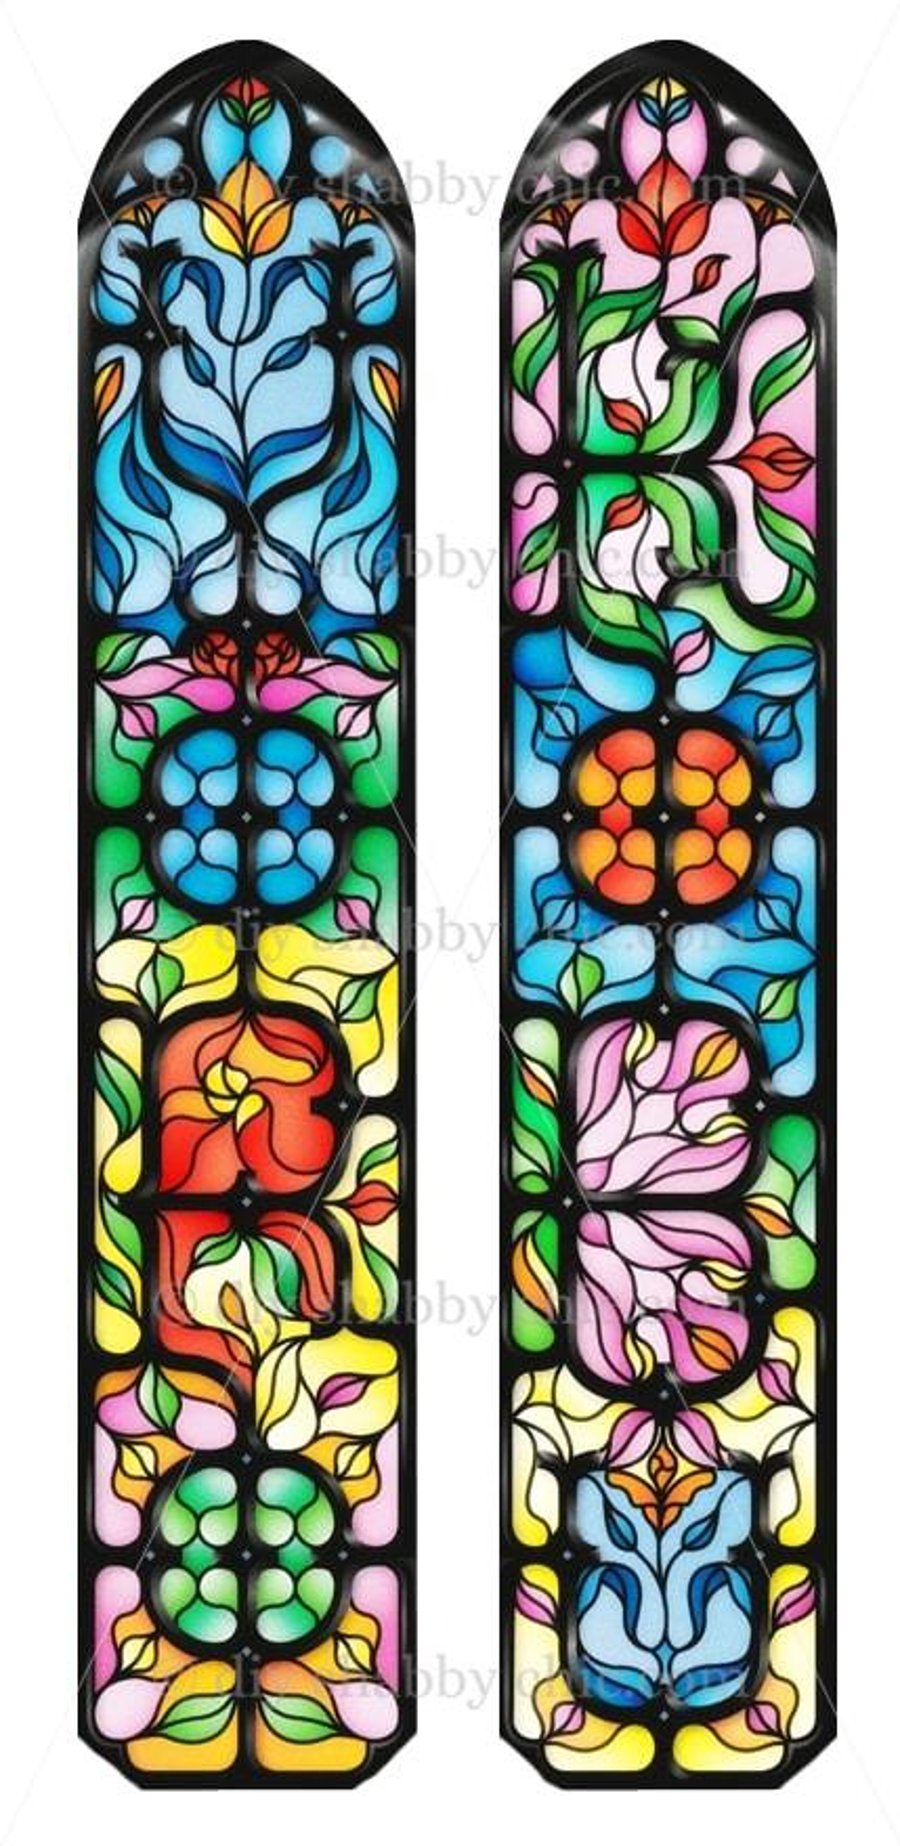 Waterslide Furniture Vintage Image Transfer DIY Shabby Chic Stained Glass Window